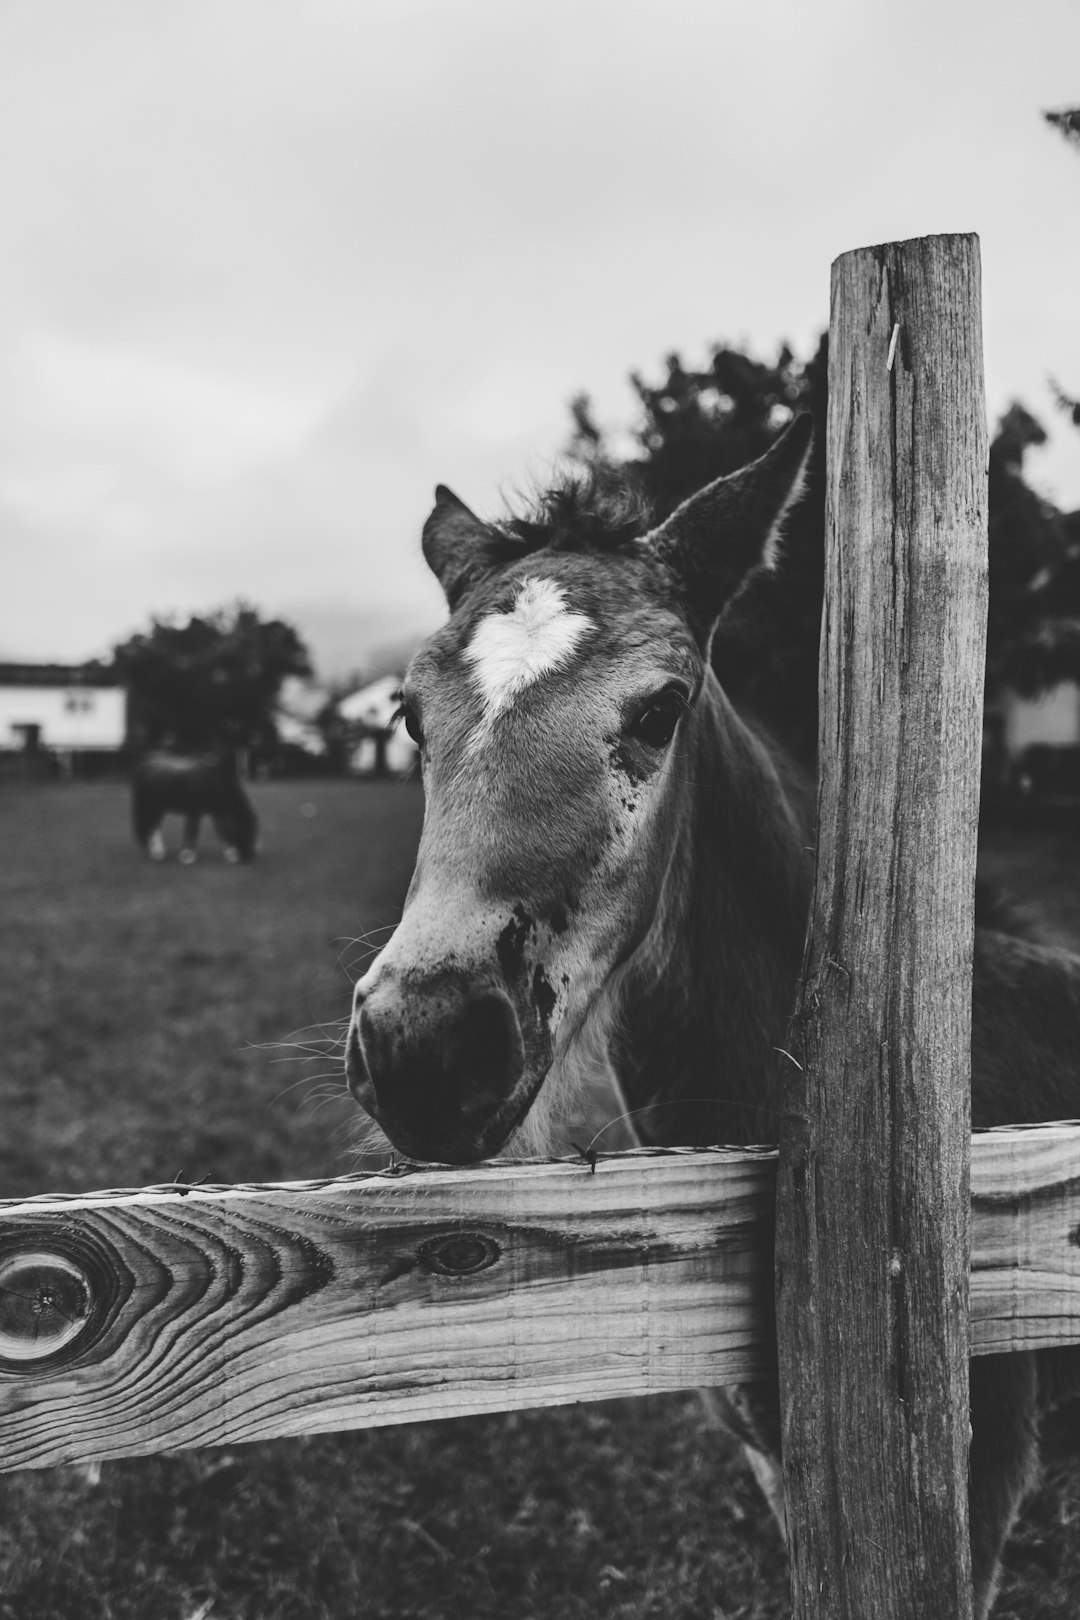 grayscale photo of horse in wooden fence